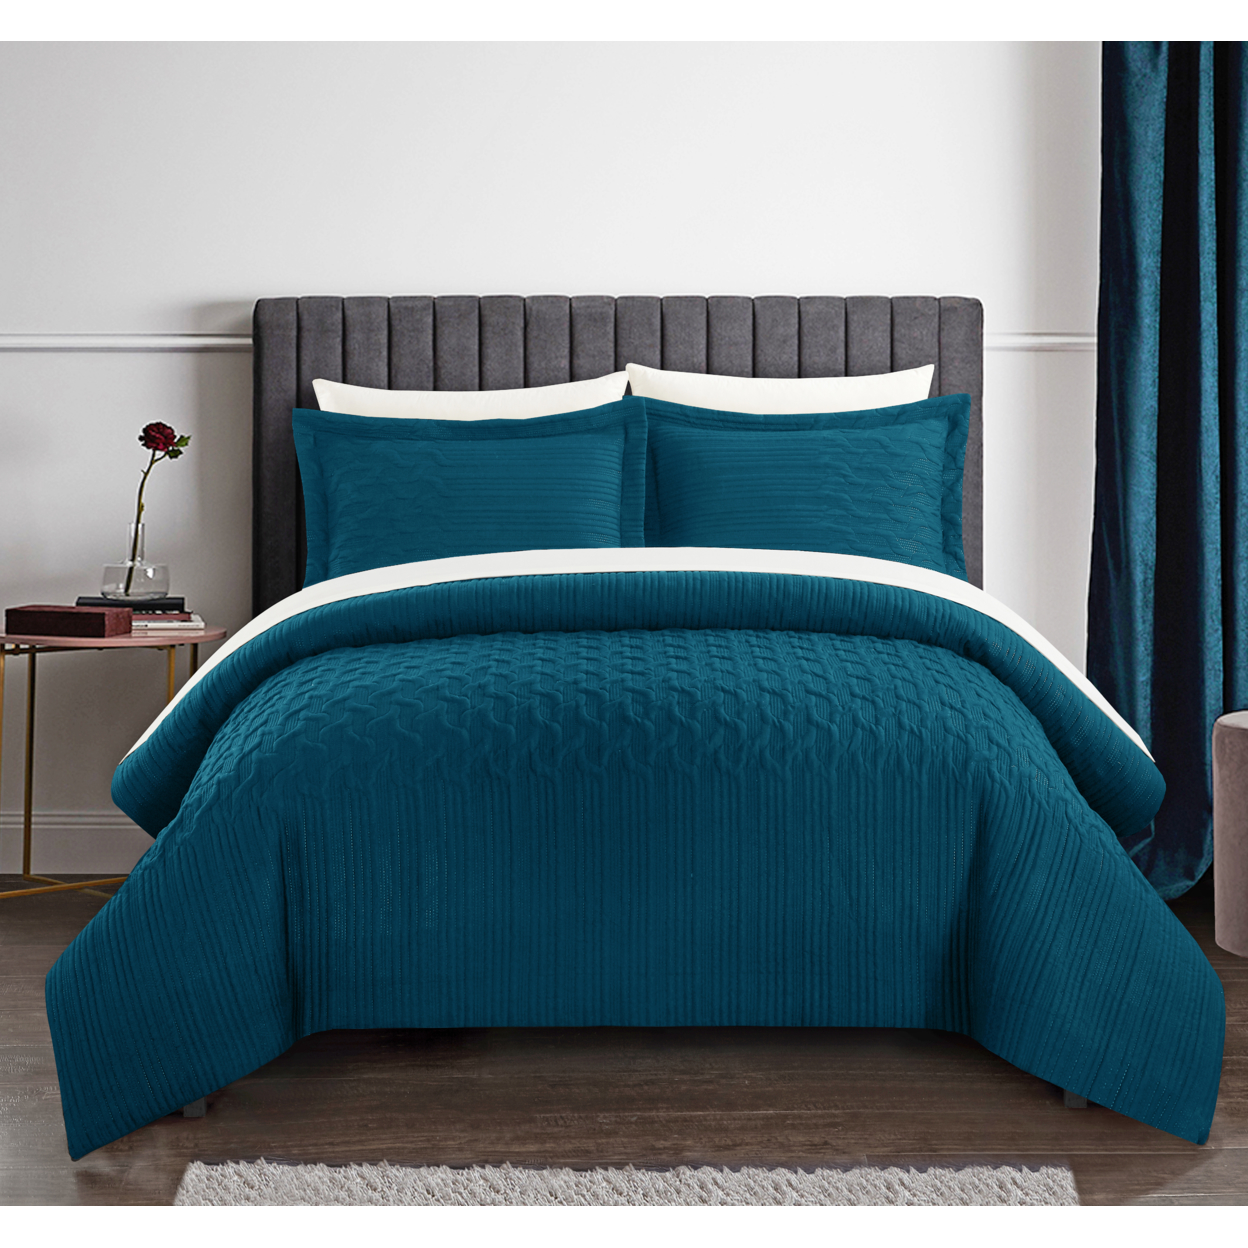 Jazmaine 3 Or 2 Piece Comforter Set Embossed Embroidered Quilted Geometric Vine Pattern Bedding - Teal, Queen